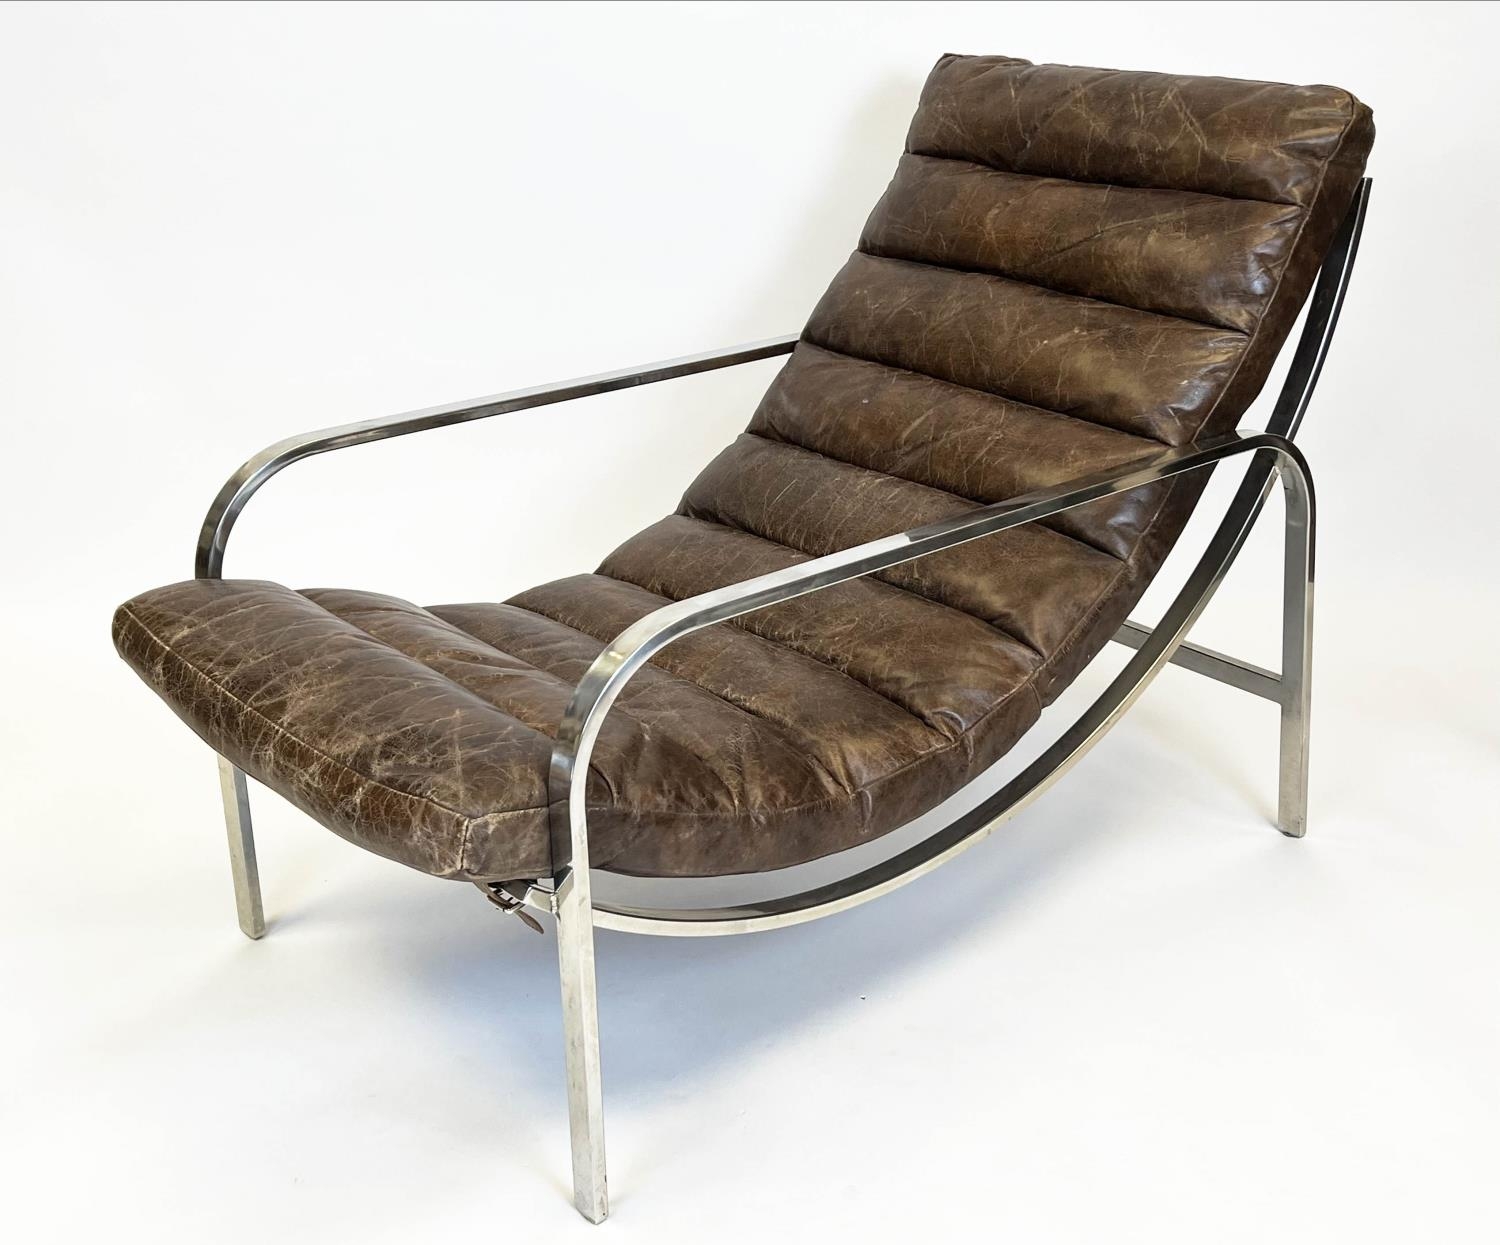 HALO SCOTT ARMCHAIR, ribbed brown leather with a stainless steel frame, 84cm H x 110cm x 63cm.